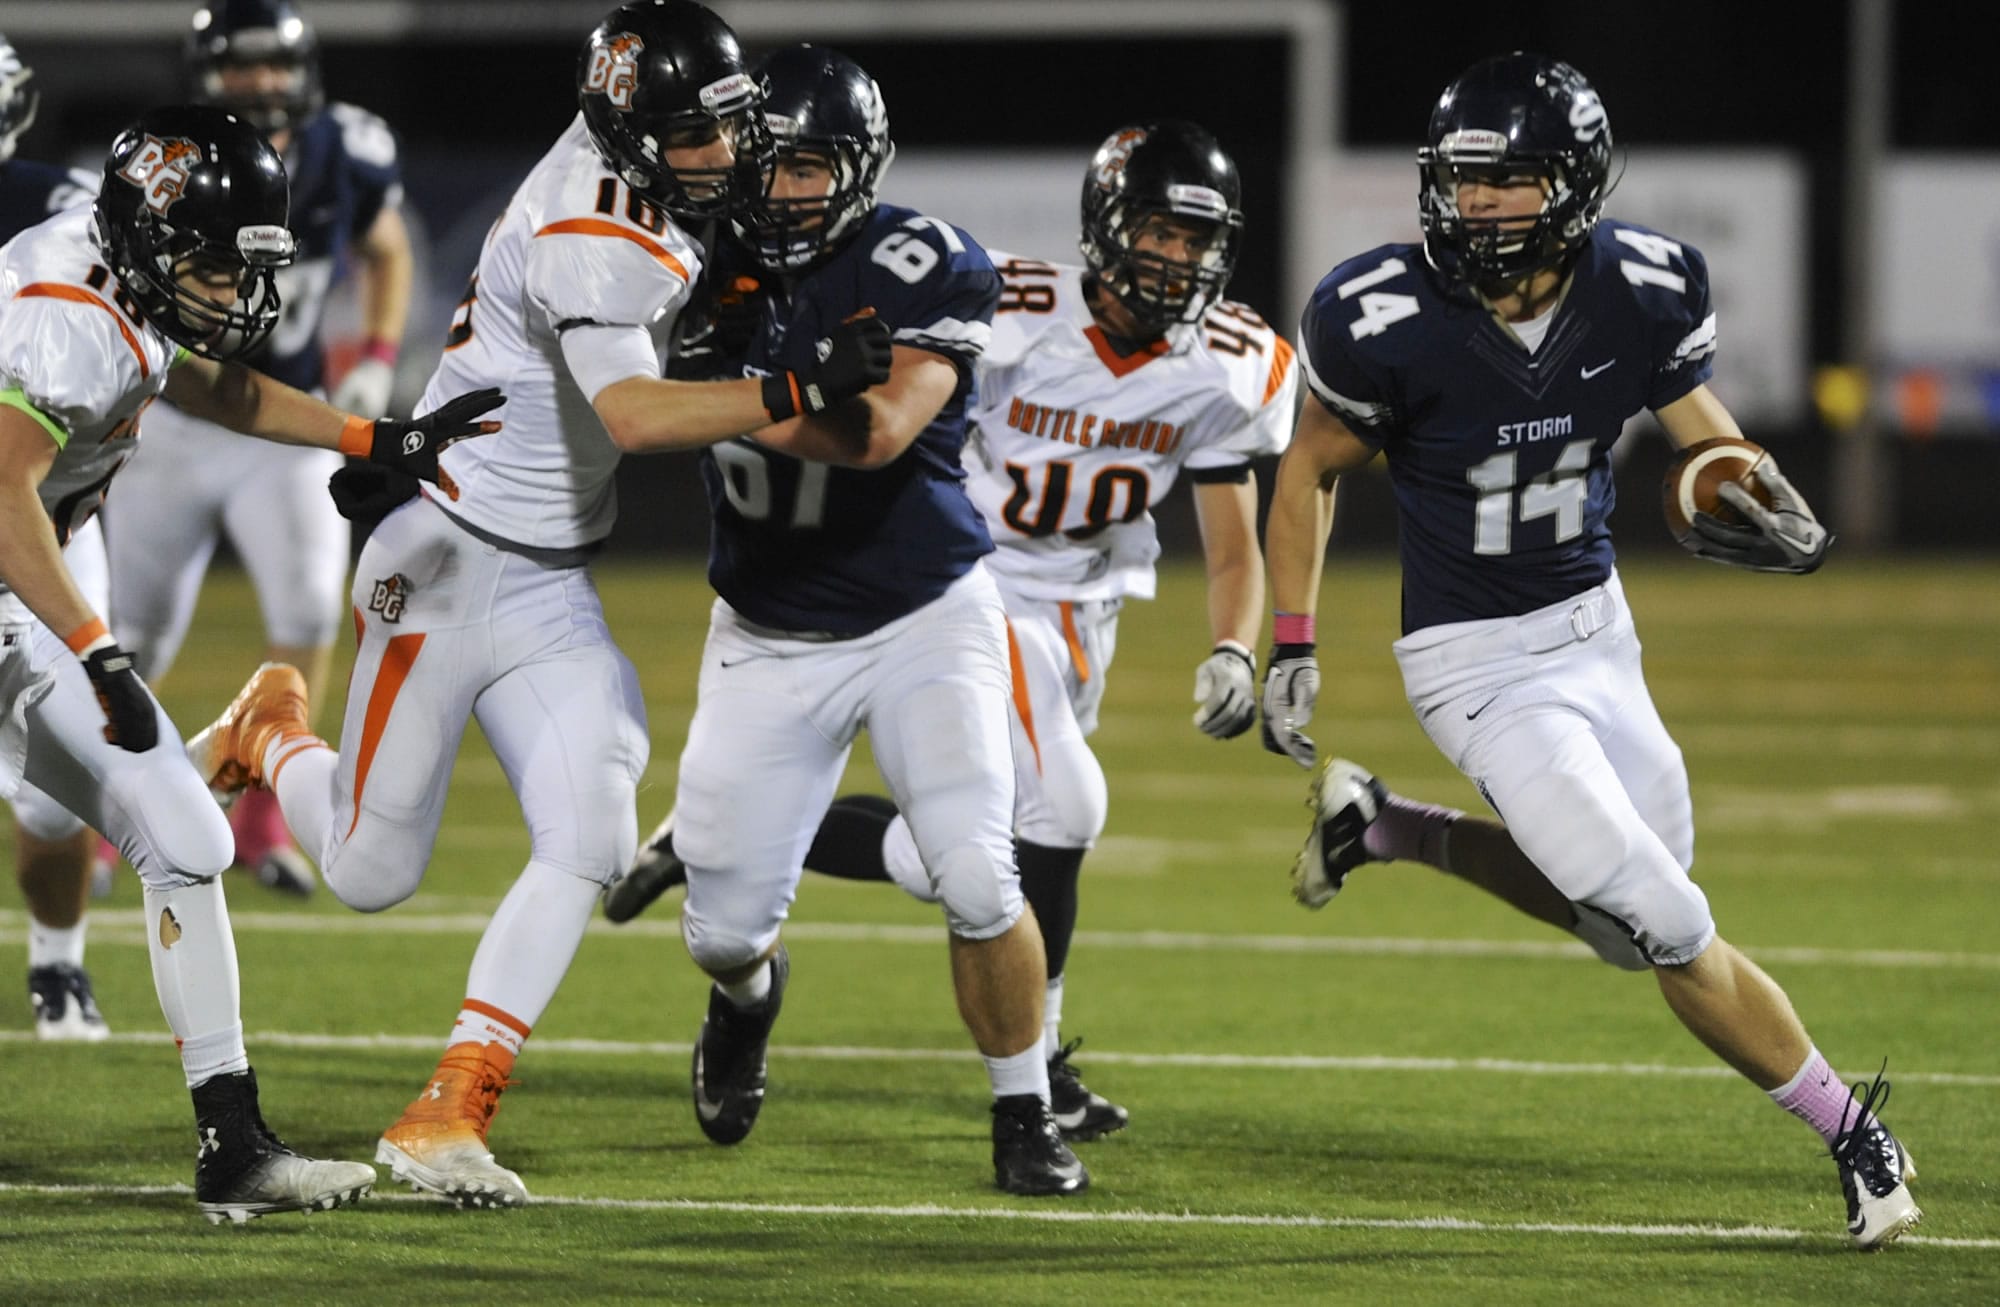 (Photo 1 of 8) Skyview's Dylan King (14) makes a run against Battle Ground during the first half Friday at Kiggins Bowl.